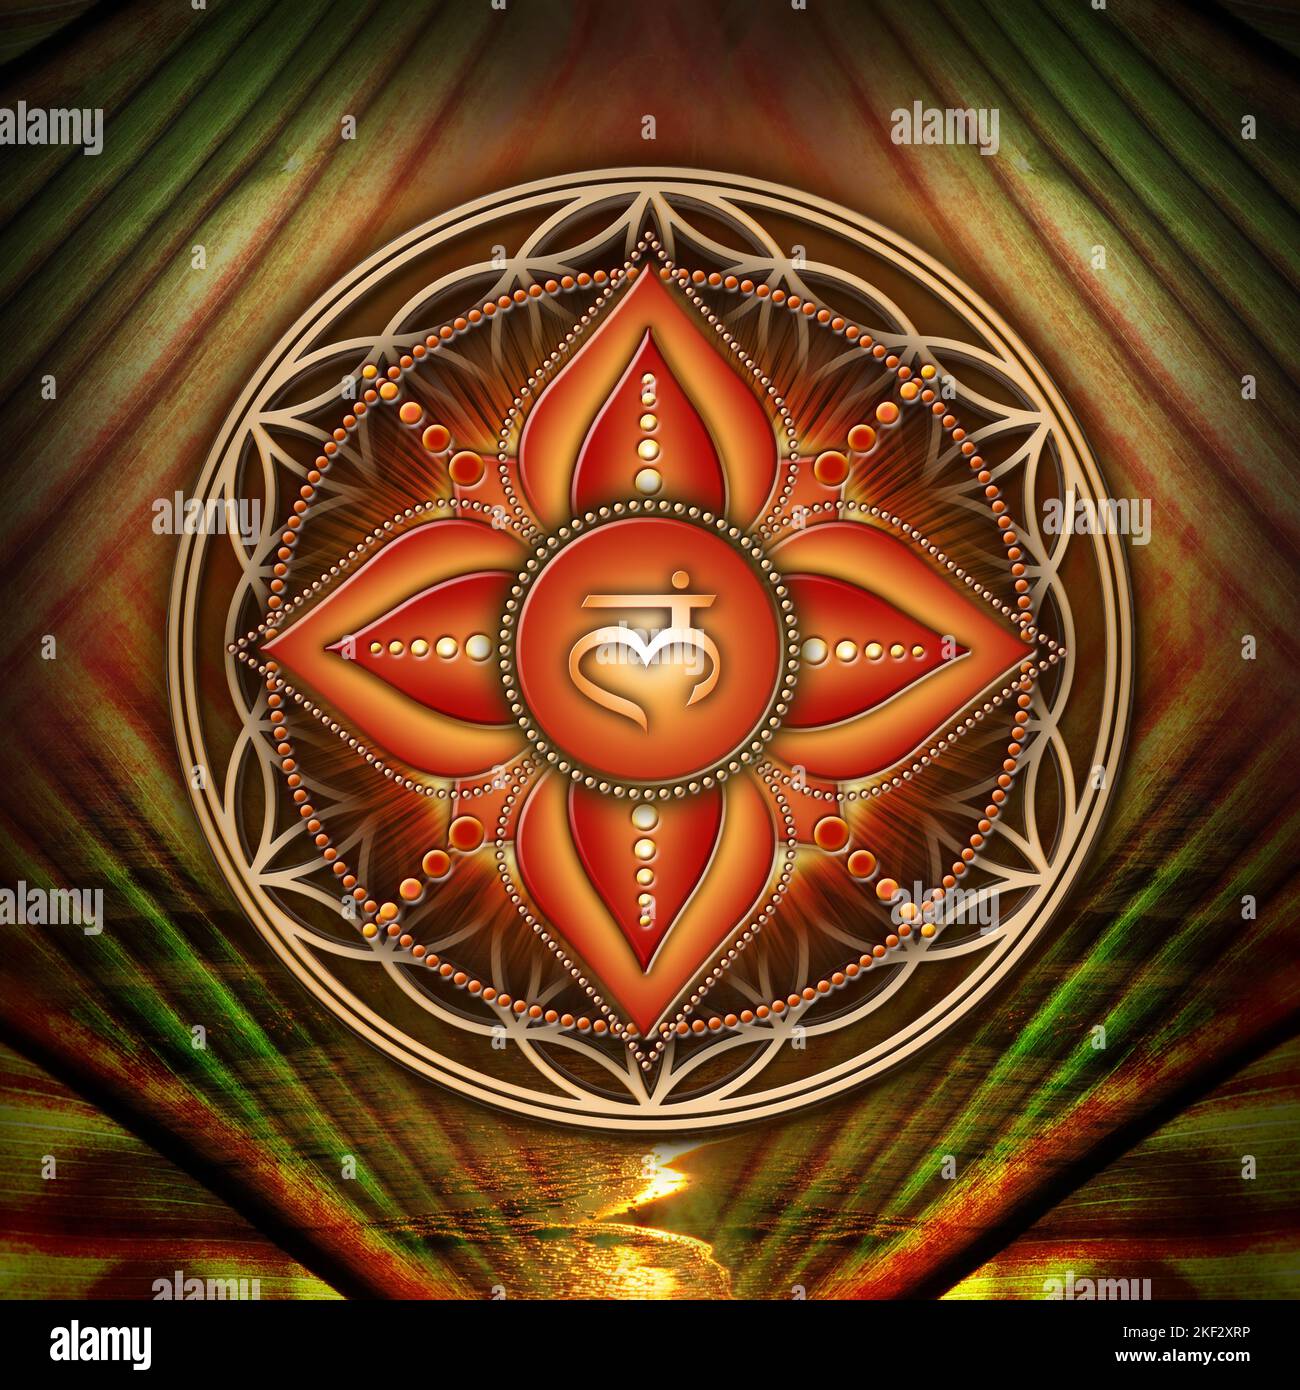 ROOT CHAKRA (1. Chakra, Muladhara) on mystical Flower of Life background. It stands for: Energy, Stability, Comfort, Safety. Affirmation: 'I AM') Stock Photo